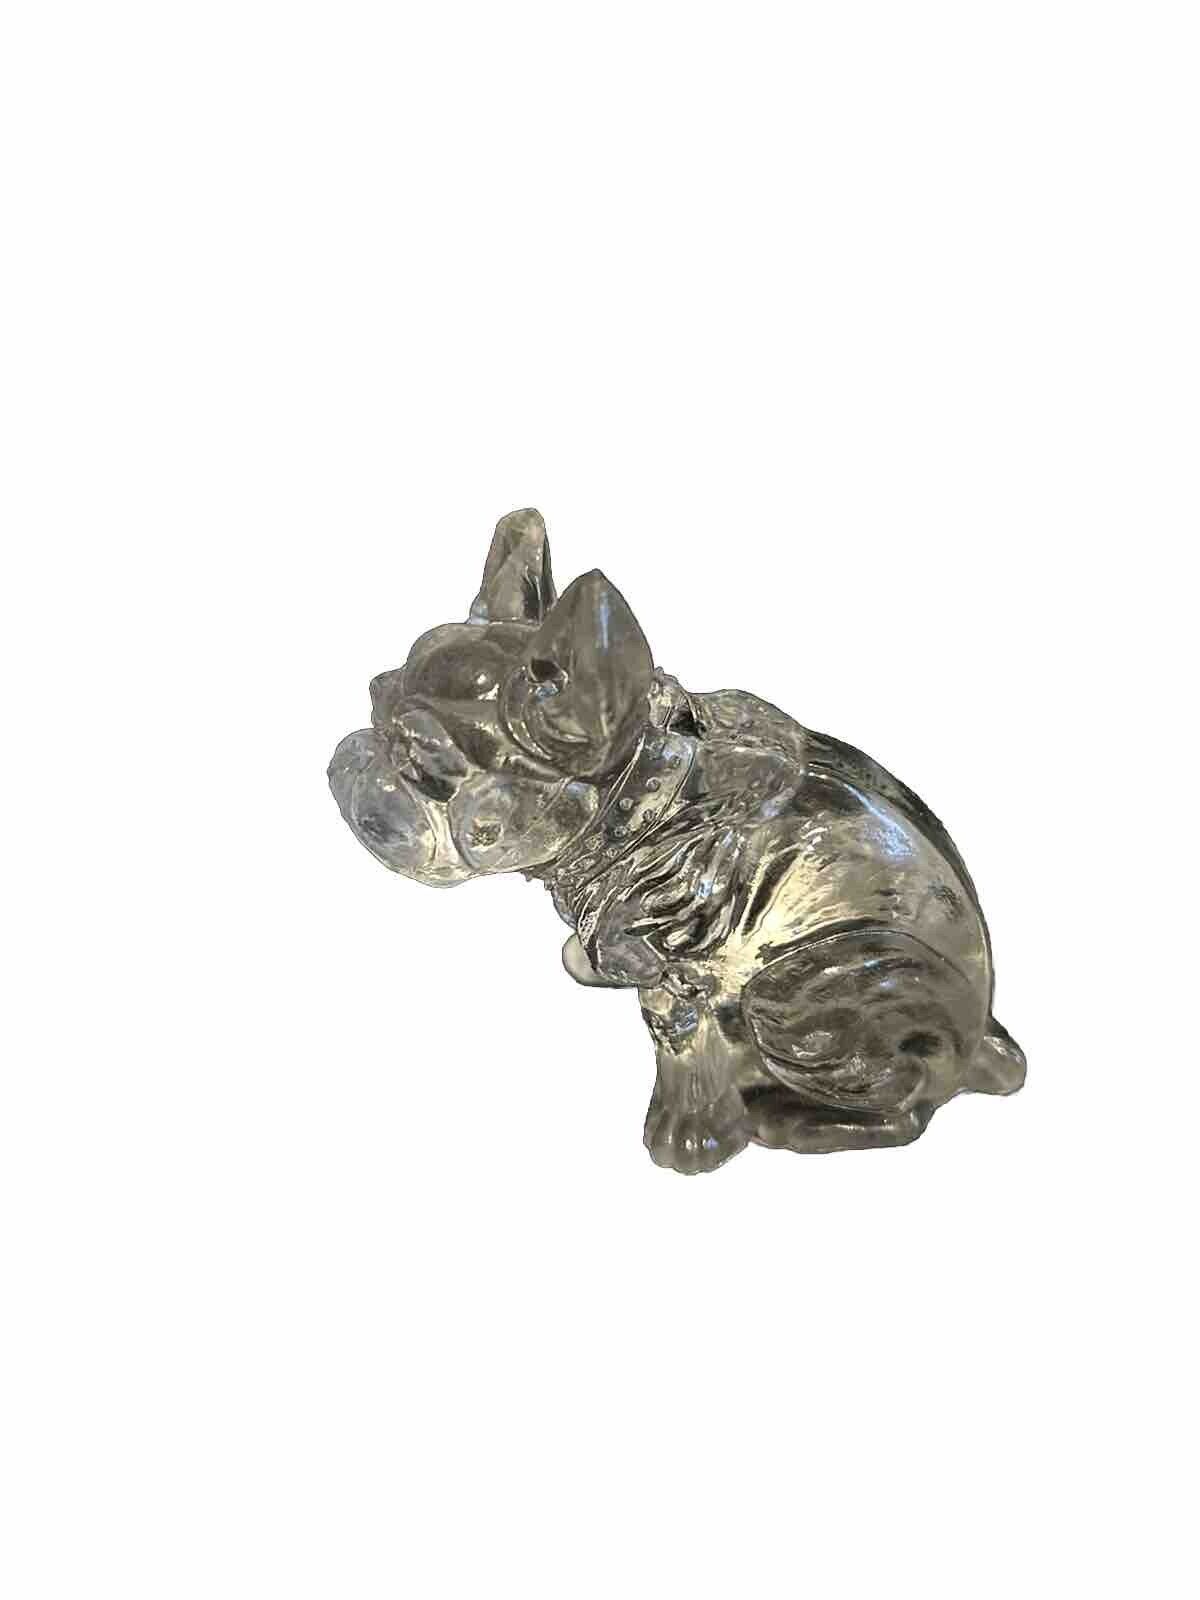 Antique Czech Frosted Glass French Bulldog Figurine - Unique & Textured